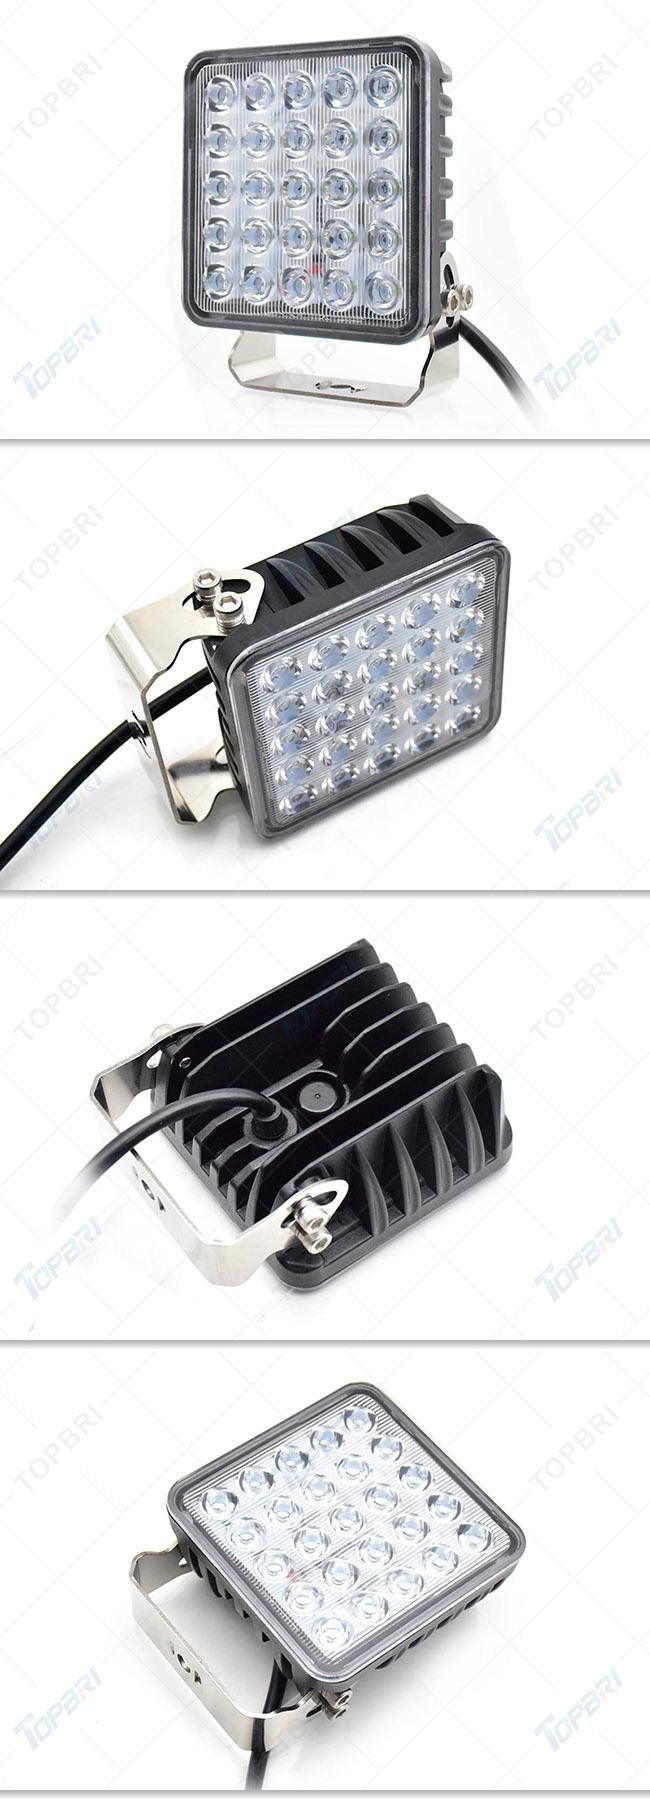 75W LED Work Fog Driving Car Lights for Motorcycle Offroad Little ATV Truck